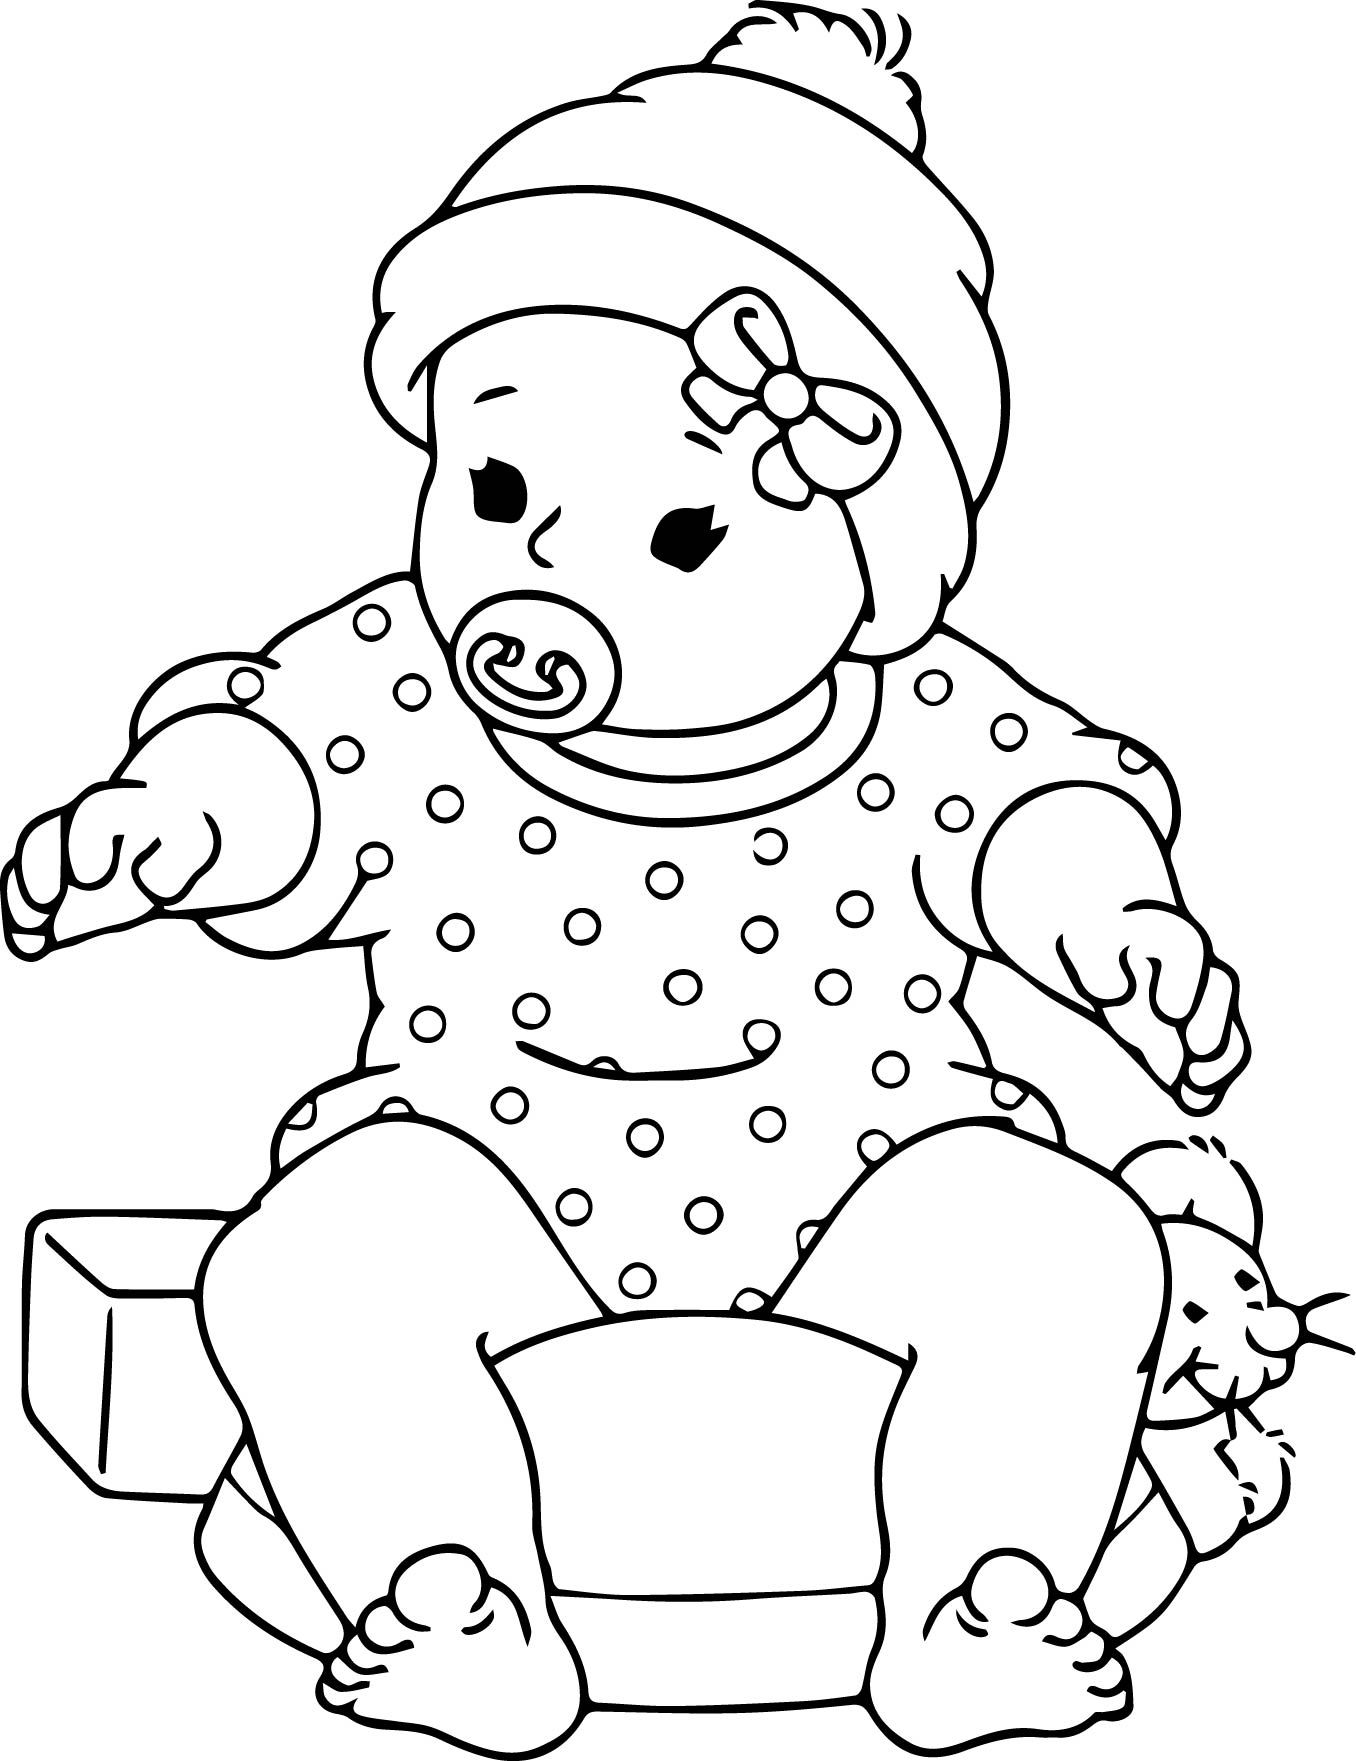 Baby Doll Coloring Page at GetColorings.com | Free printable colorings